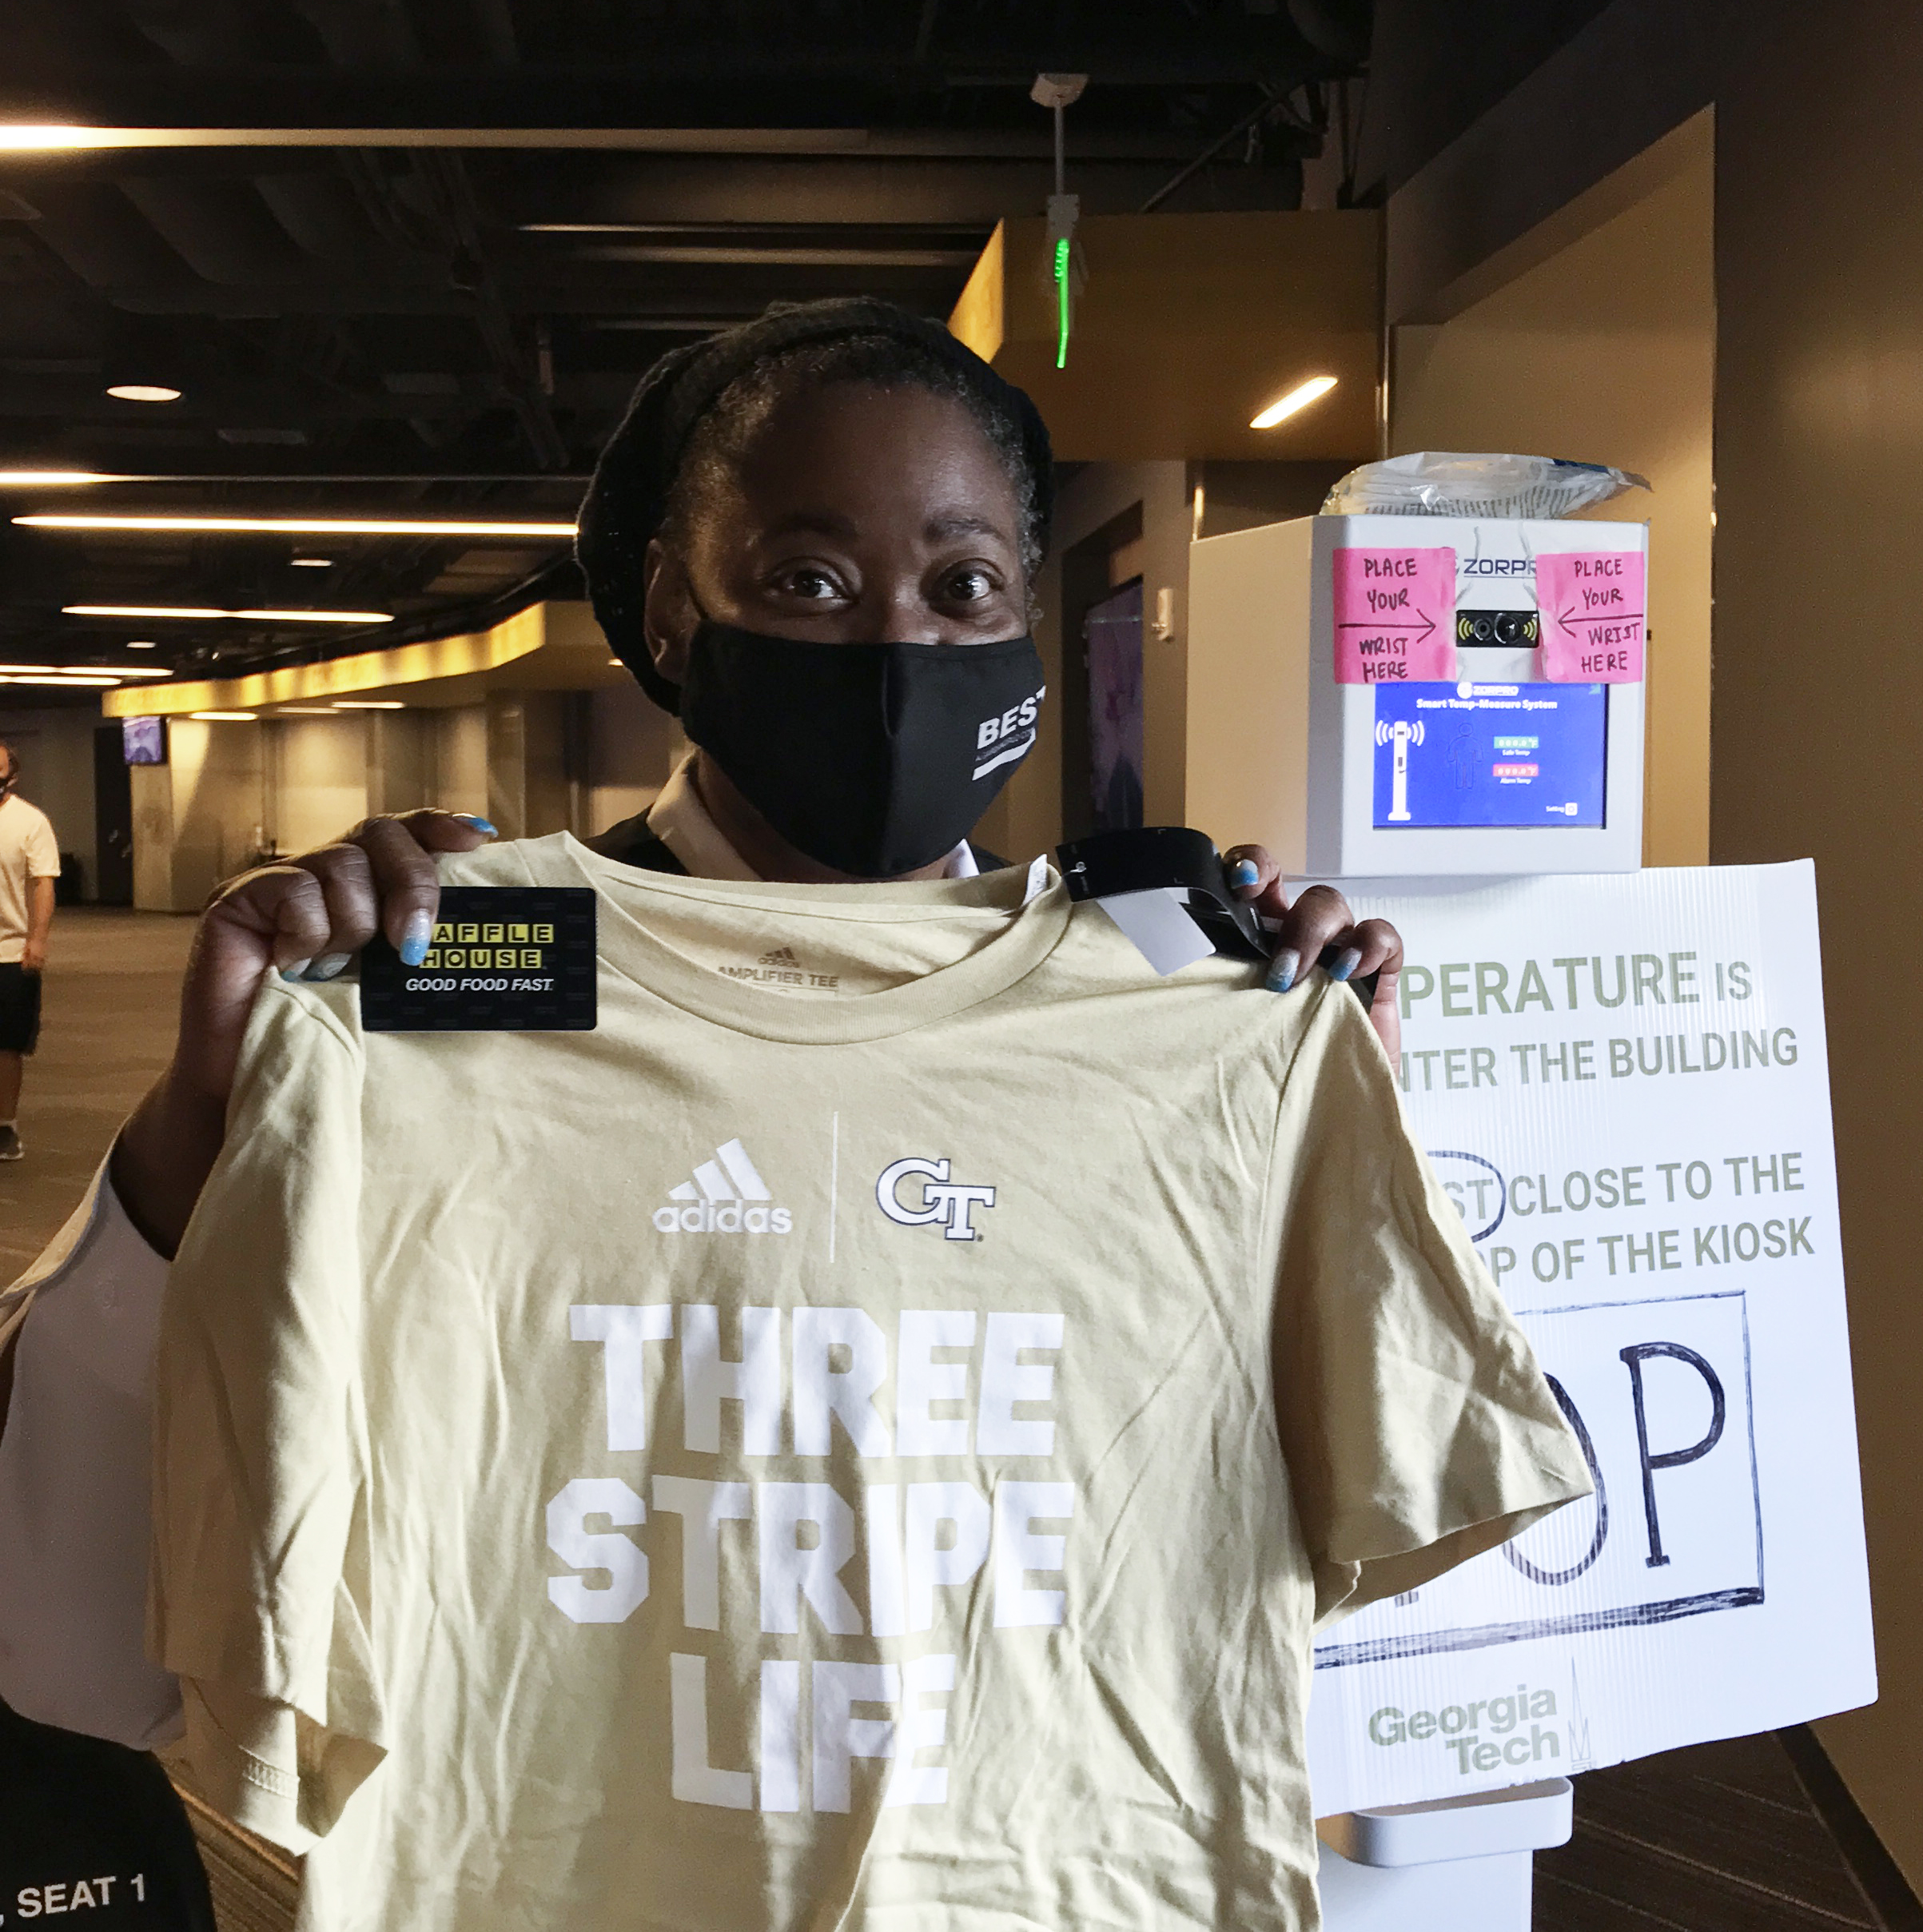 Ms. Keresa, a staff member with Georgia Tech's Covid-19 campus vaccine clinic, holds one of the GT Athletics t-shirts and Waffle House discount cards handed out at a recent campus clinic.